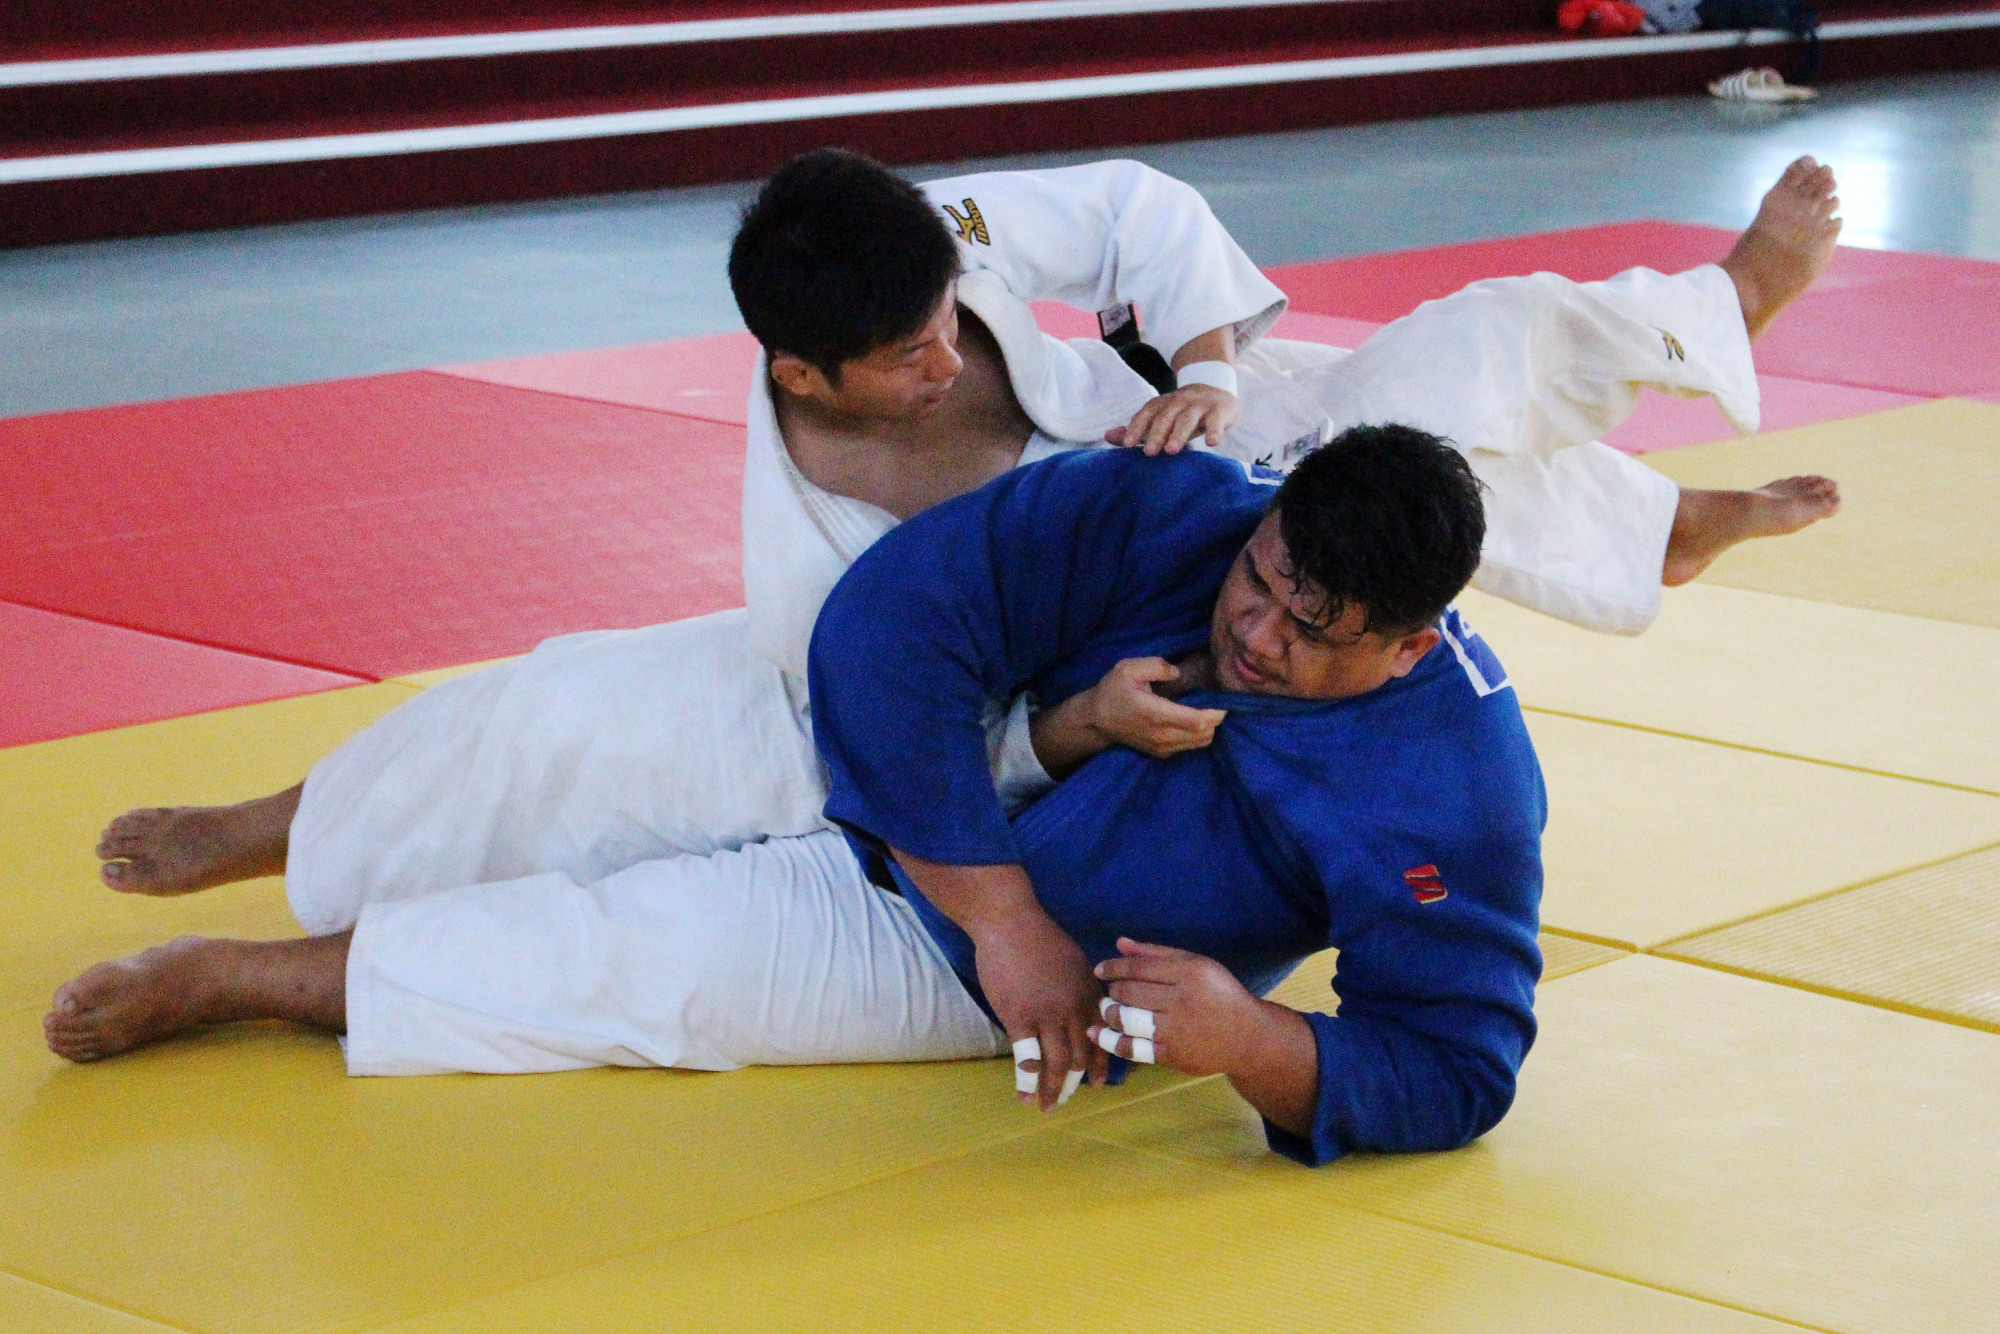 Judo gives Japan a soft-power boost in the Pacific